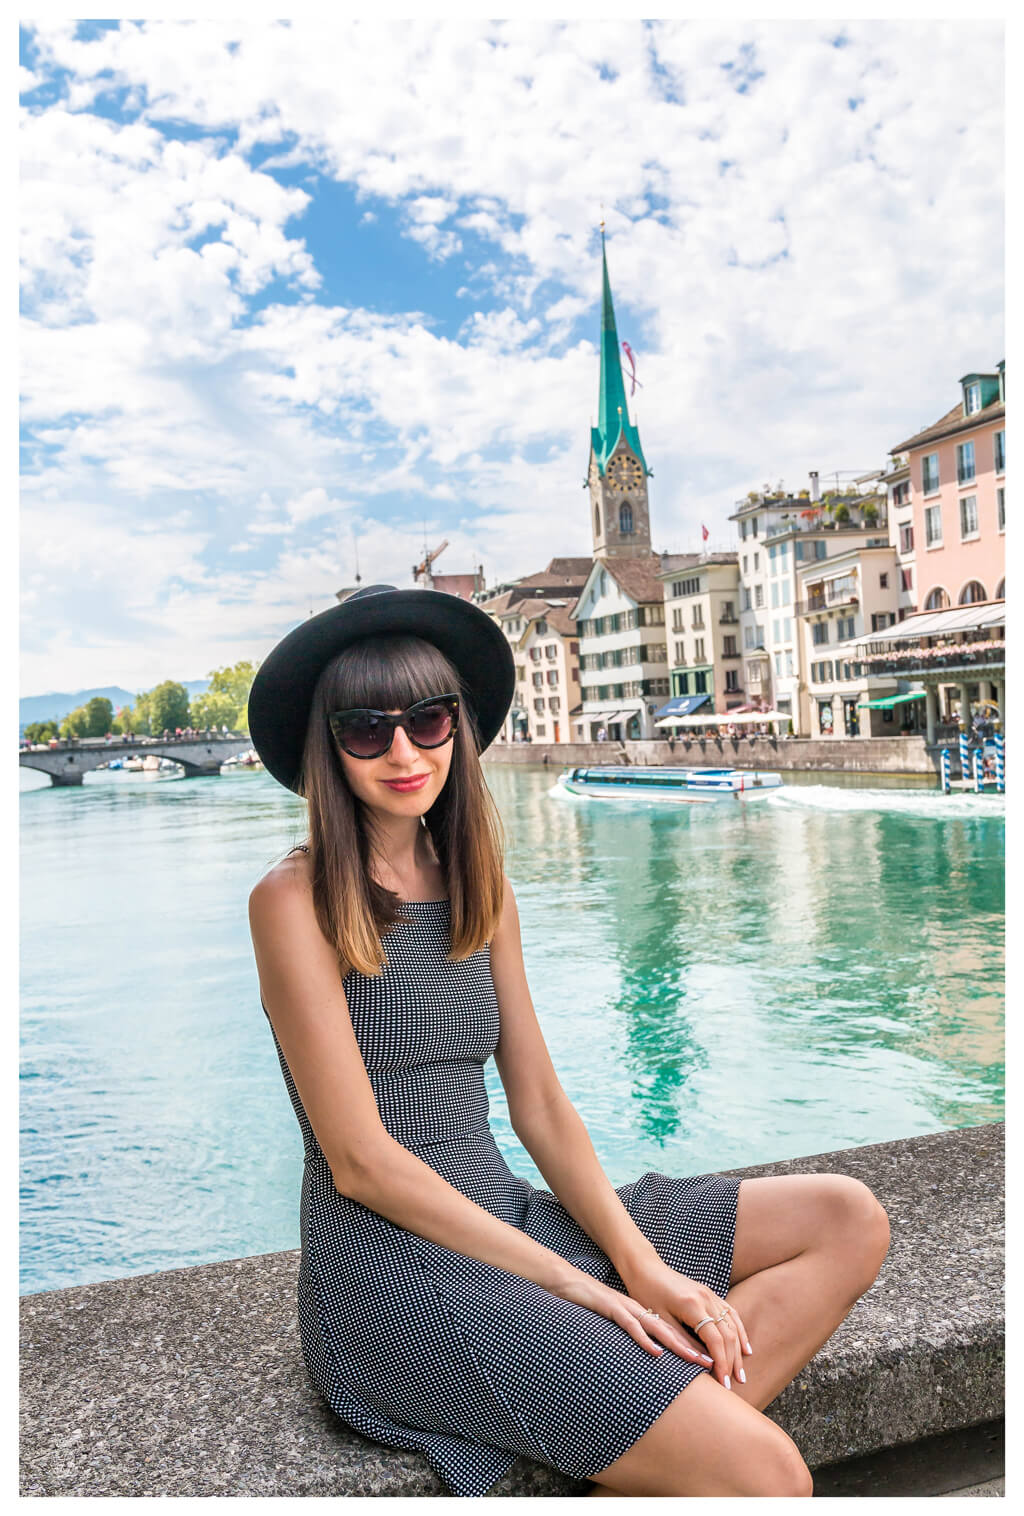 Travel Diaries : A Local Guide To Weekend in Zurich | Travel destinations